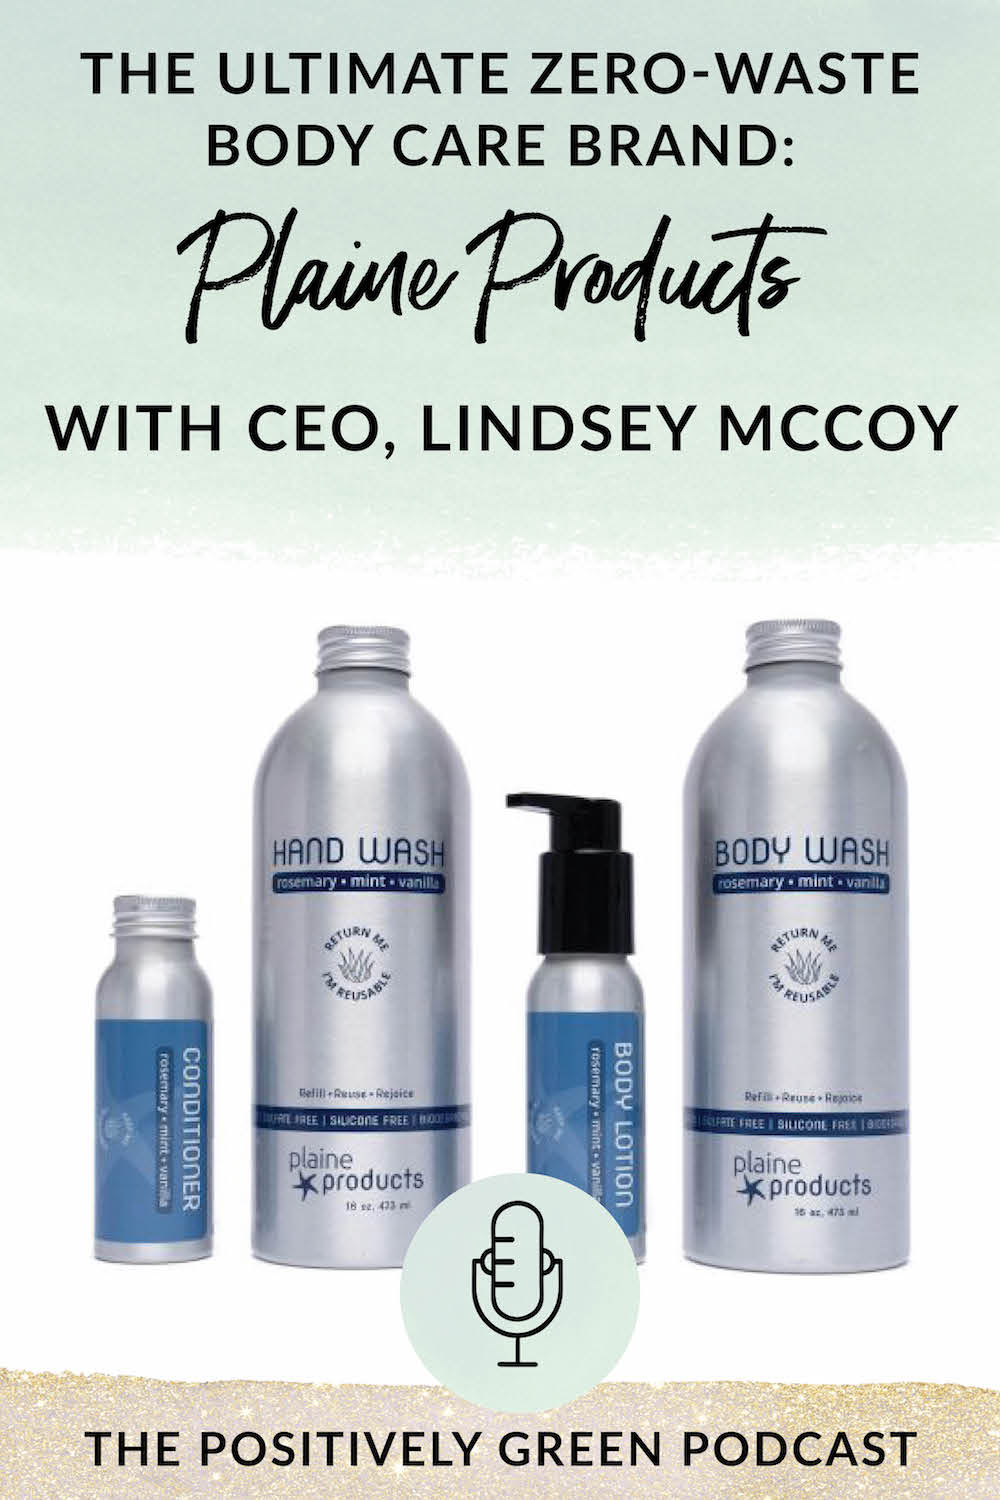 The ultimate zero-waste body care brand Plaine Products